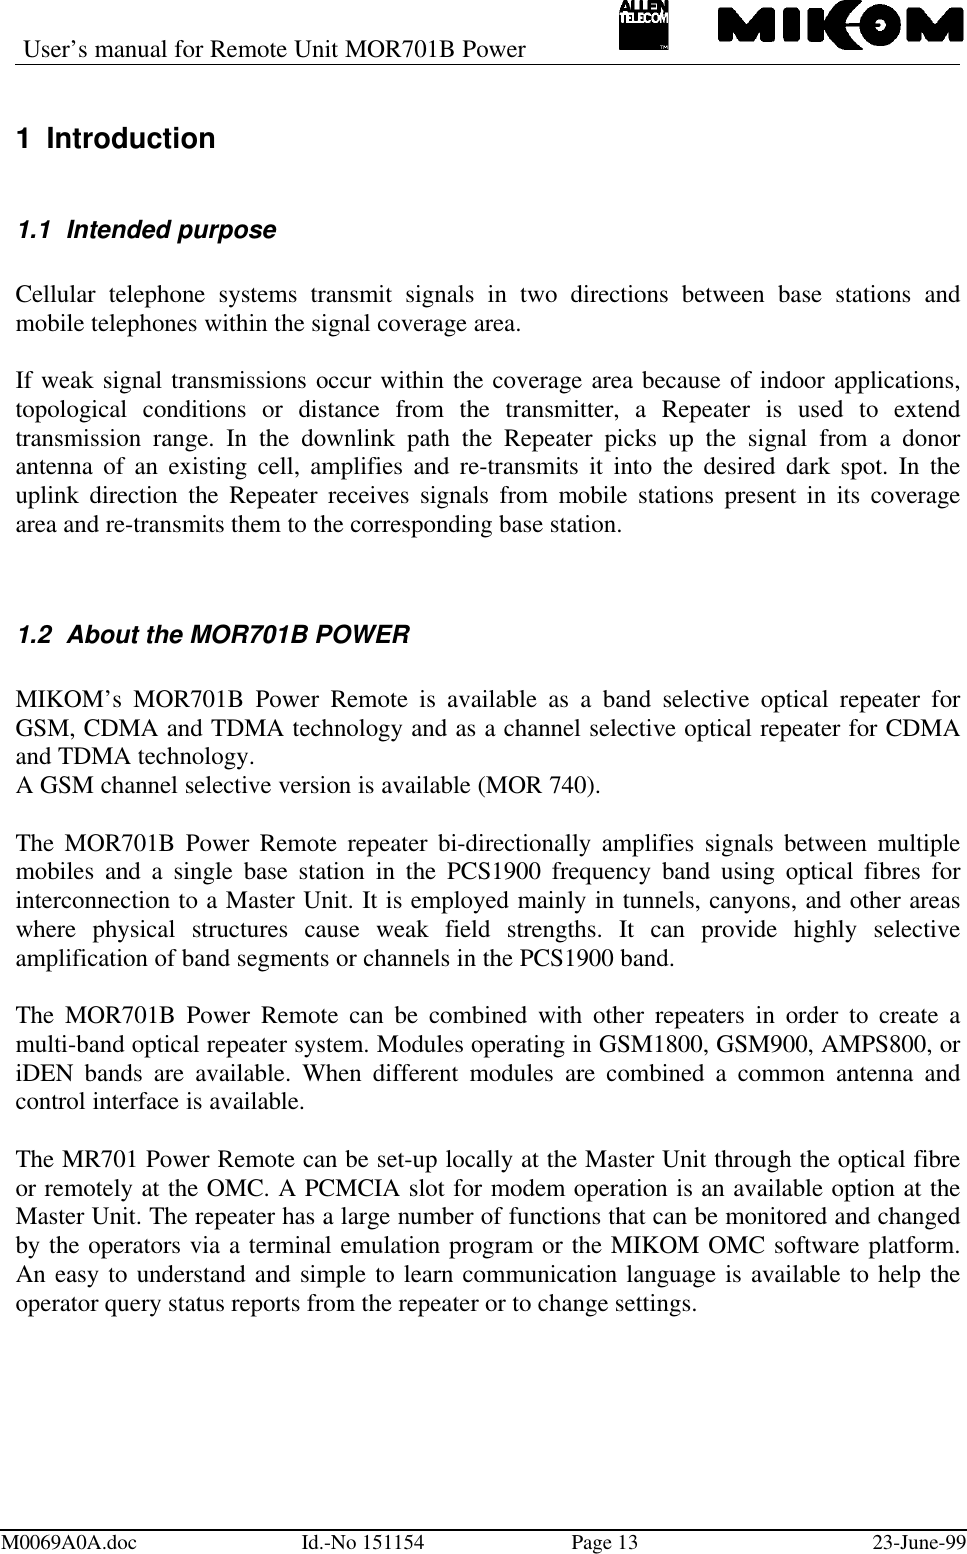 User’s manual for Remote Unit MOR701B PowerM0069A0A.doc Id.-No 151154 Page 13 23-June-991 Introduction1.1 Intended purposeCellular telephone systems transmit signals in two directions between base stations andmobile telephones within the signal coverage area.If weak signal transmissions occur within the coverage area because of indoor applications,topological conditions or distance from the transmitter, a Repeater is used to extendtransmission range. In the downlink path the Repeater picks up the signal from a donorantenna of an existing cell, amplifies and re-transmits it into the desired dark spot. In theuplink direction the Repeater receives signals from mobile stations present in its coveragearea and re-transmits them to the corresponding base station.1.2 About the MOR701B POWERMIKOM’s MOR701B Power Remote is available as a band selective optical repeater forGSM, CDMA and TDMA technology and as a channel selective optical repeater for CDMAand TDMA technology.A GSM channel selective version is available (MOR 740).The MOR701B Power Remote repeater bi-directionally amplifies signals between multiplemobiles and a single base station in the PCS1900 frequency band using optical fibres forinterconnection to a Master Unit. It is employed mainly in tunnels, canyons, and other areaswhere physical structures cause weak field strengths. It can provide highly selectiveamplification of band segments or channels in the PCS1900 band.The MOR701B Power Remote can be combined with other repeaters in order to create amulti-band optical repeater system. Modules operating in GSM1800, GSM900, AMPS800, oriDEN bands are available. When different modules are combined a common antenna andcontrol interface is available.The MR701 Power Remote can be set-up locally at the Master Unit through the optical fibreor remotely at the OMC. A PCMCIA slot for modem operation is an available option at theMaster Unit. The repeater has a large number of functions that can be monitored and changedby the operators via a terminal emulation program or the MIKOM OMC software platform.An easy to understand and simple to learn communication language is available to help theoperator query status reports from the repeater or to change settings.